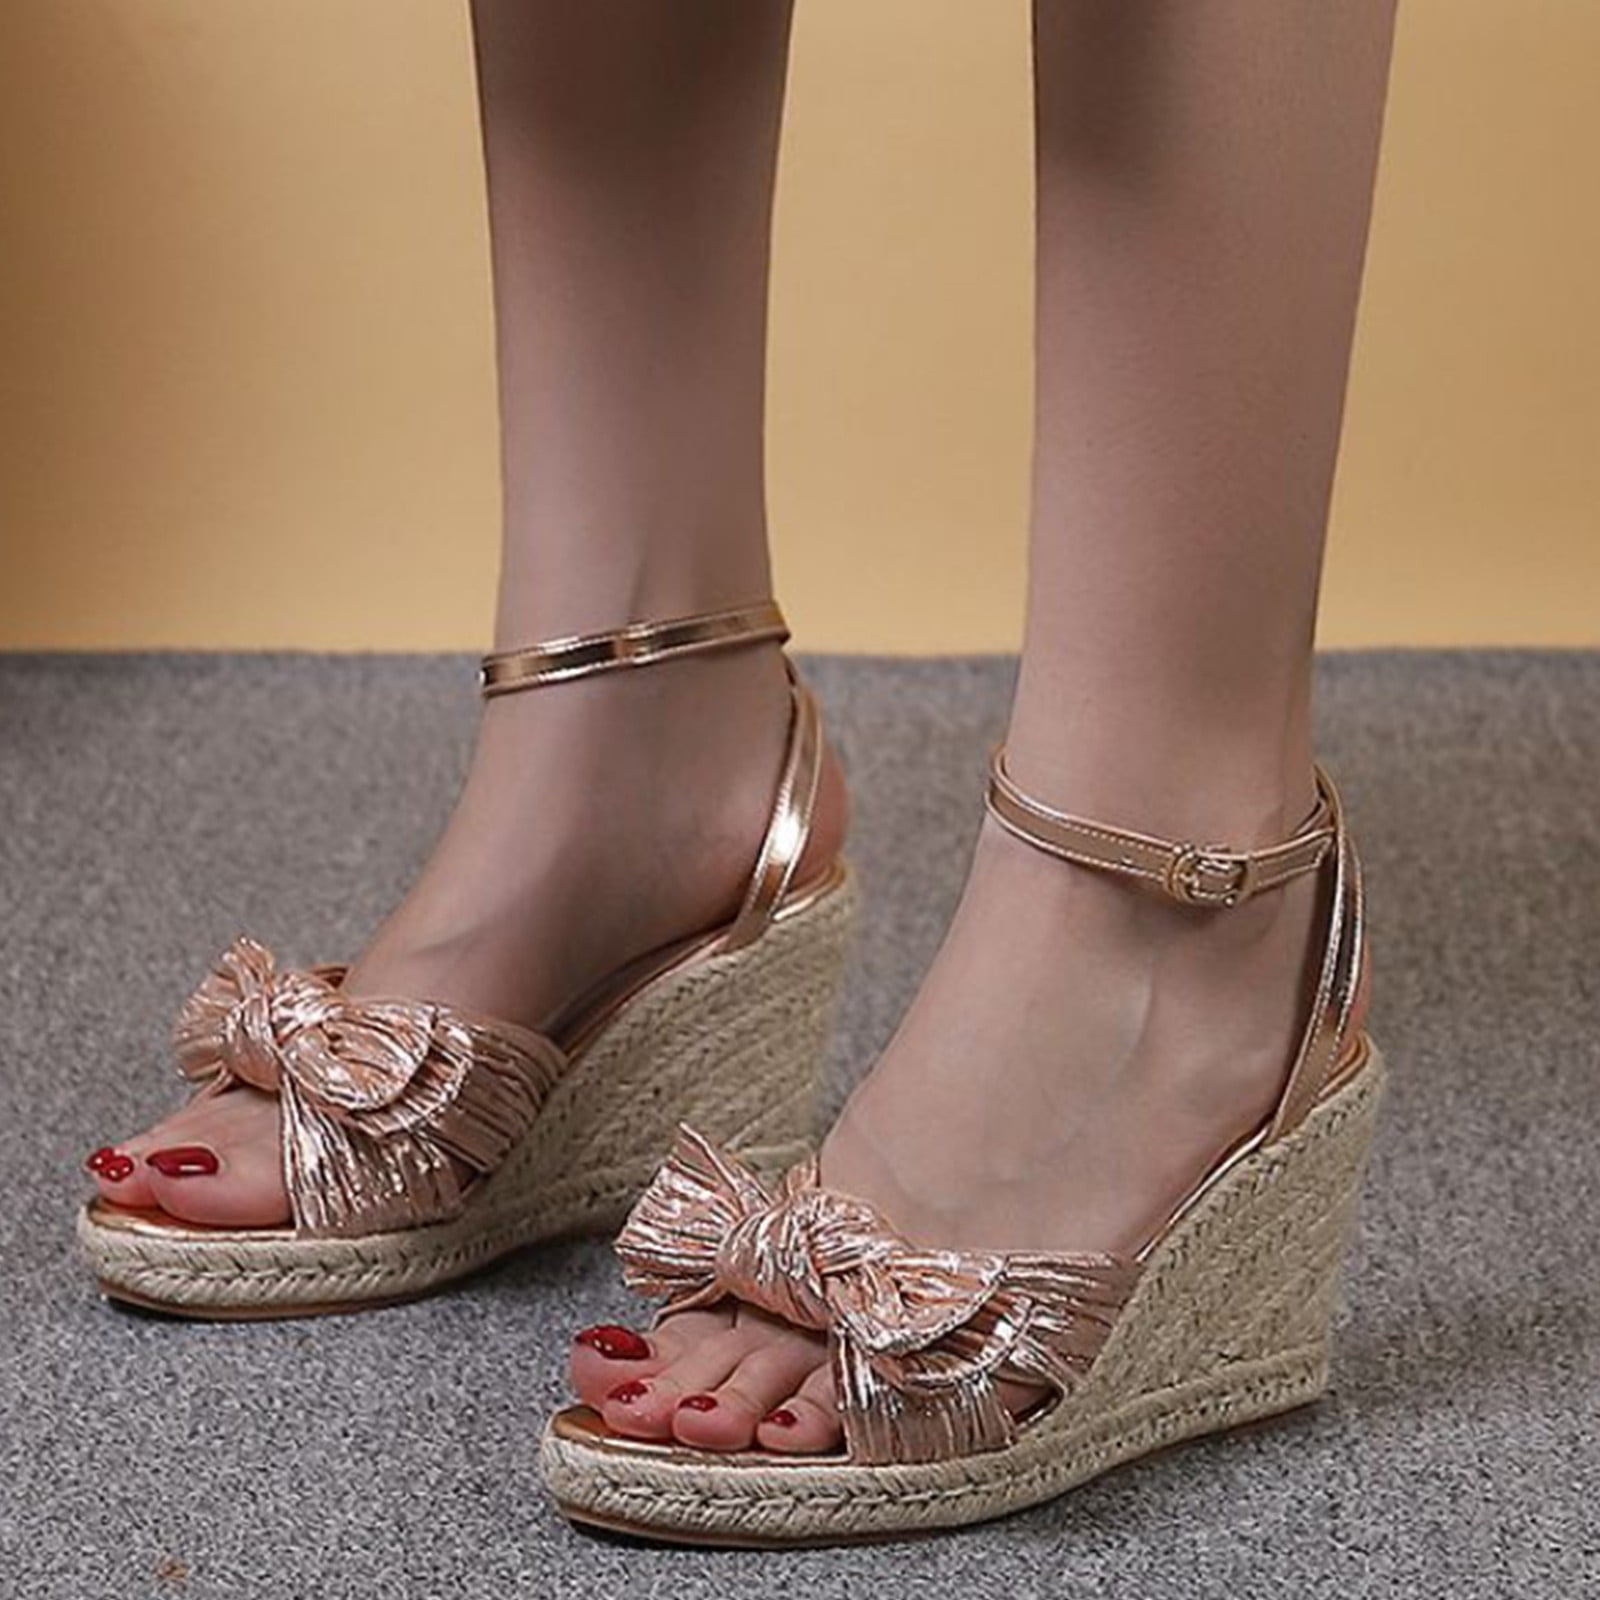 Rhinestone Sandals Women's Casual Shoes GCSG39 Platform Wedges High heels |  Touchy Style